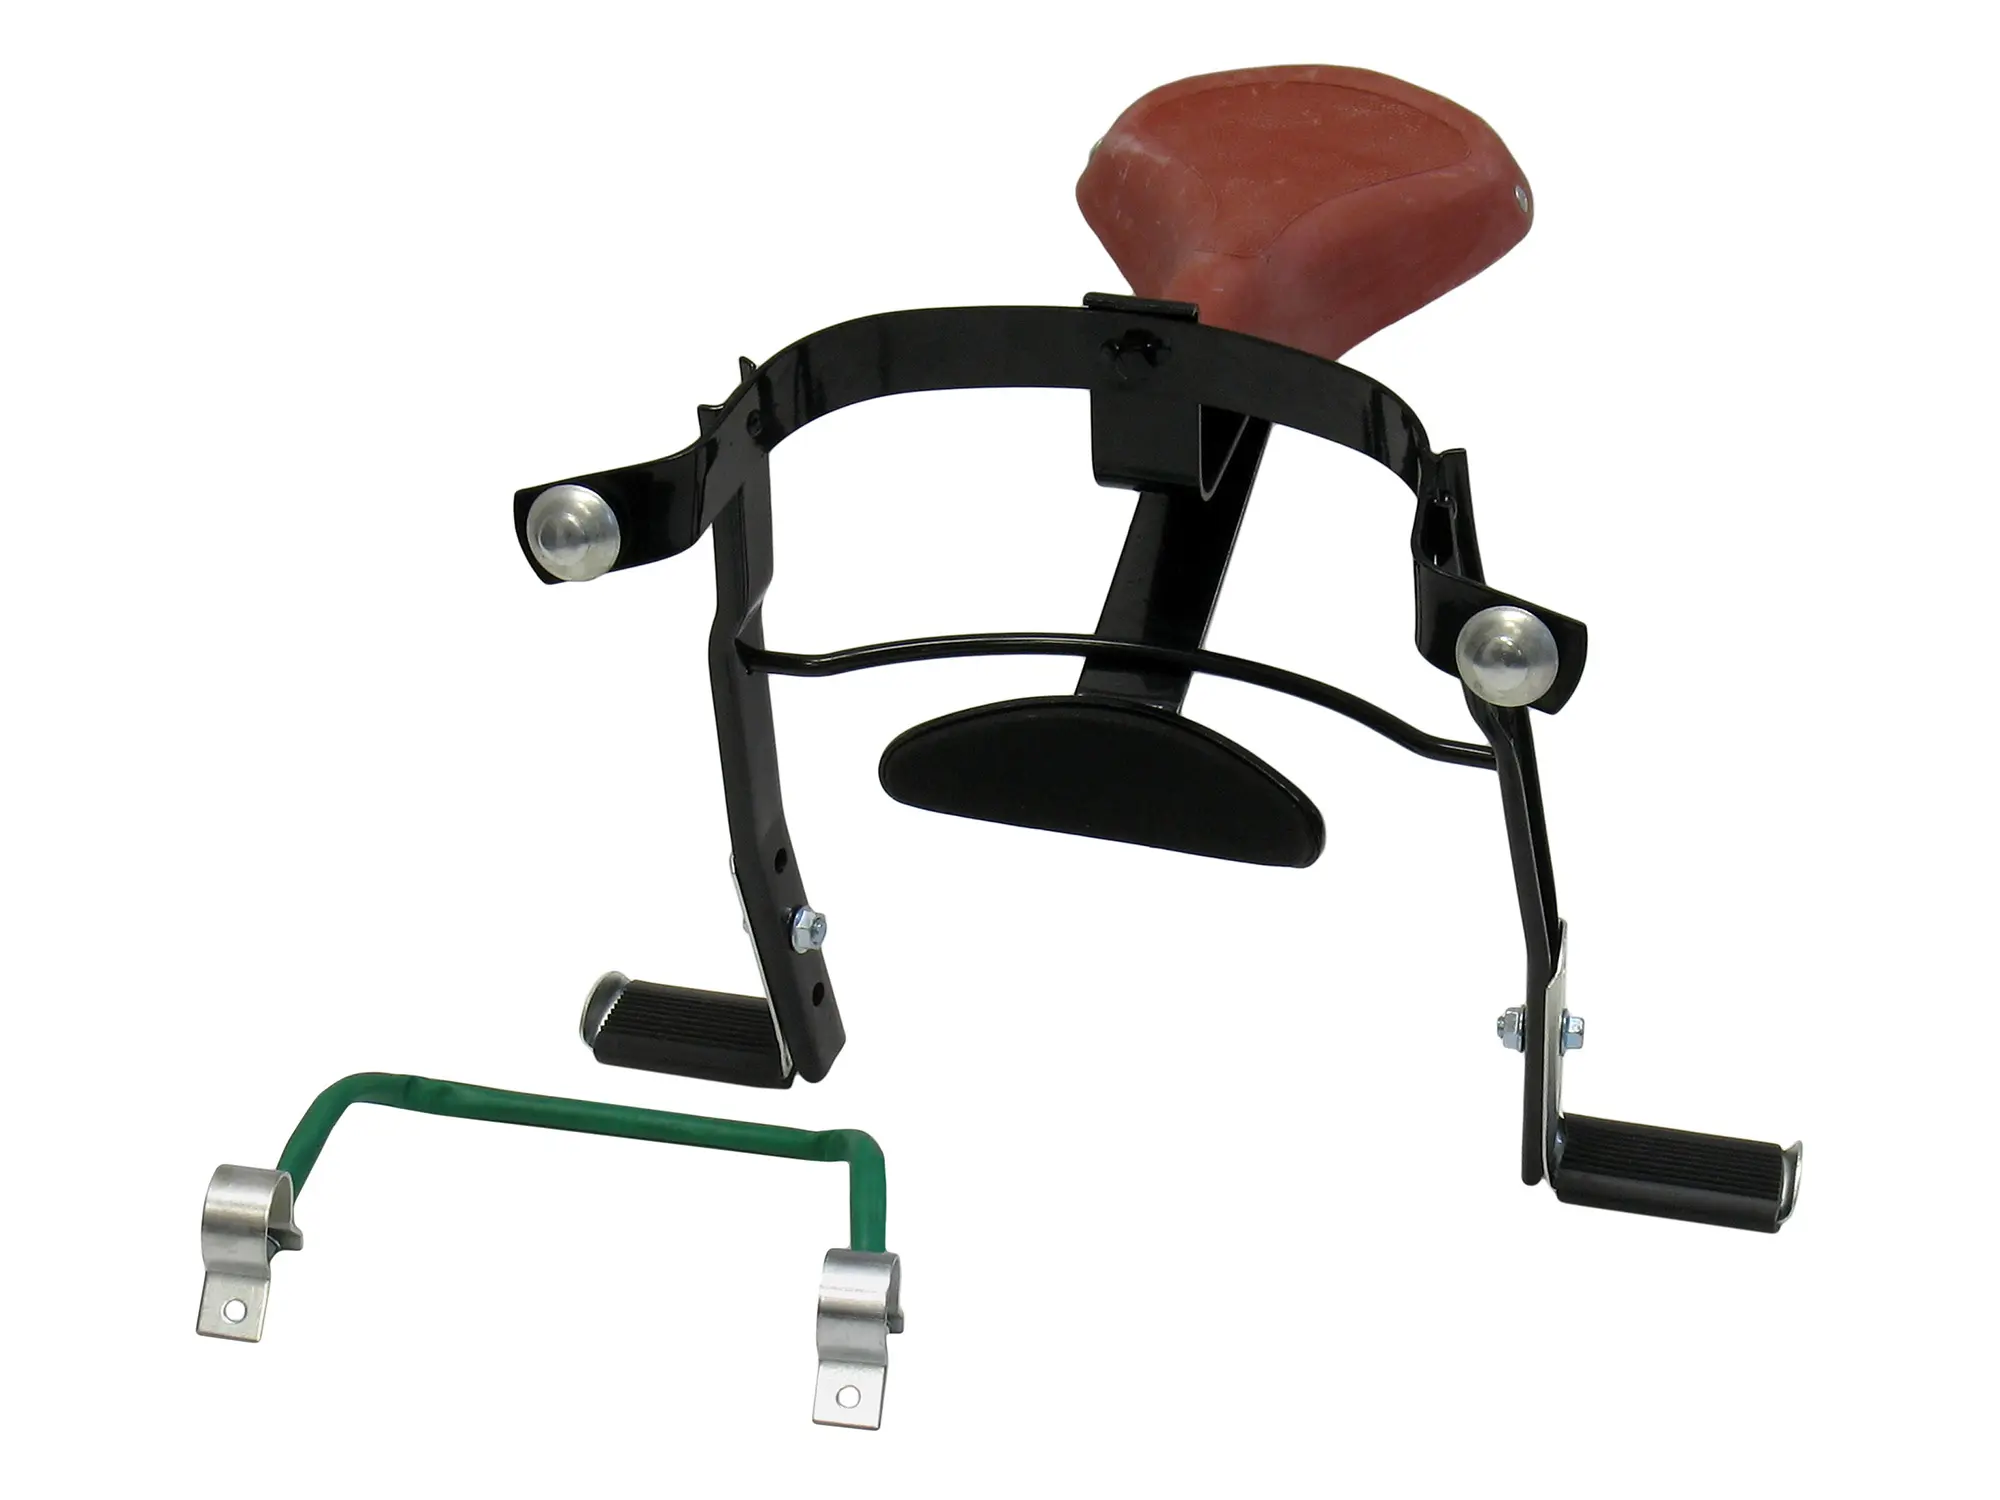 Set: Child seat with footrests and handle - Simson KR51 Schwalbe, Item no: 10062367 - Image 1